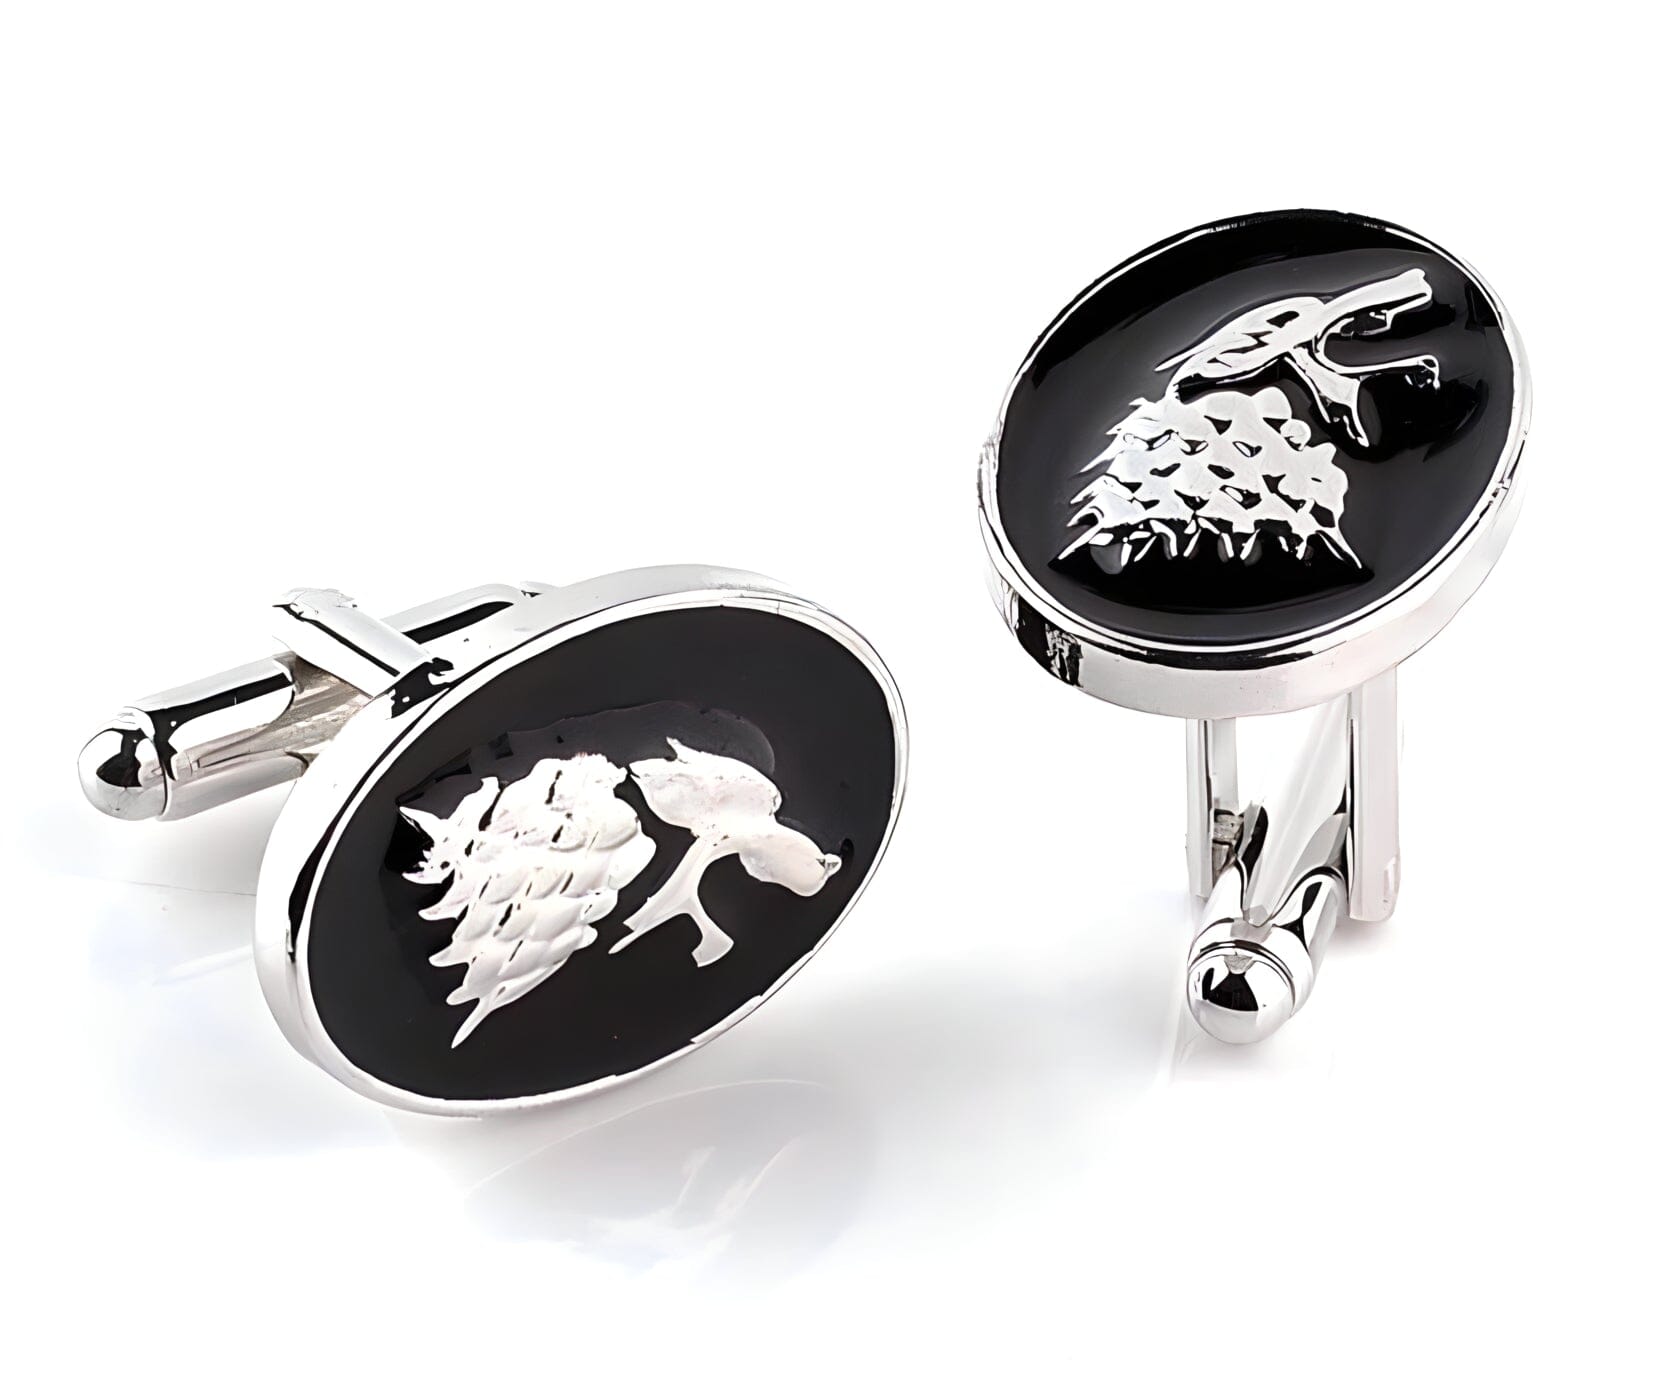 The Thrones Luxury Cuff Links Shop5798684 Store 